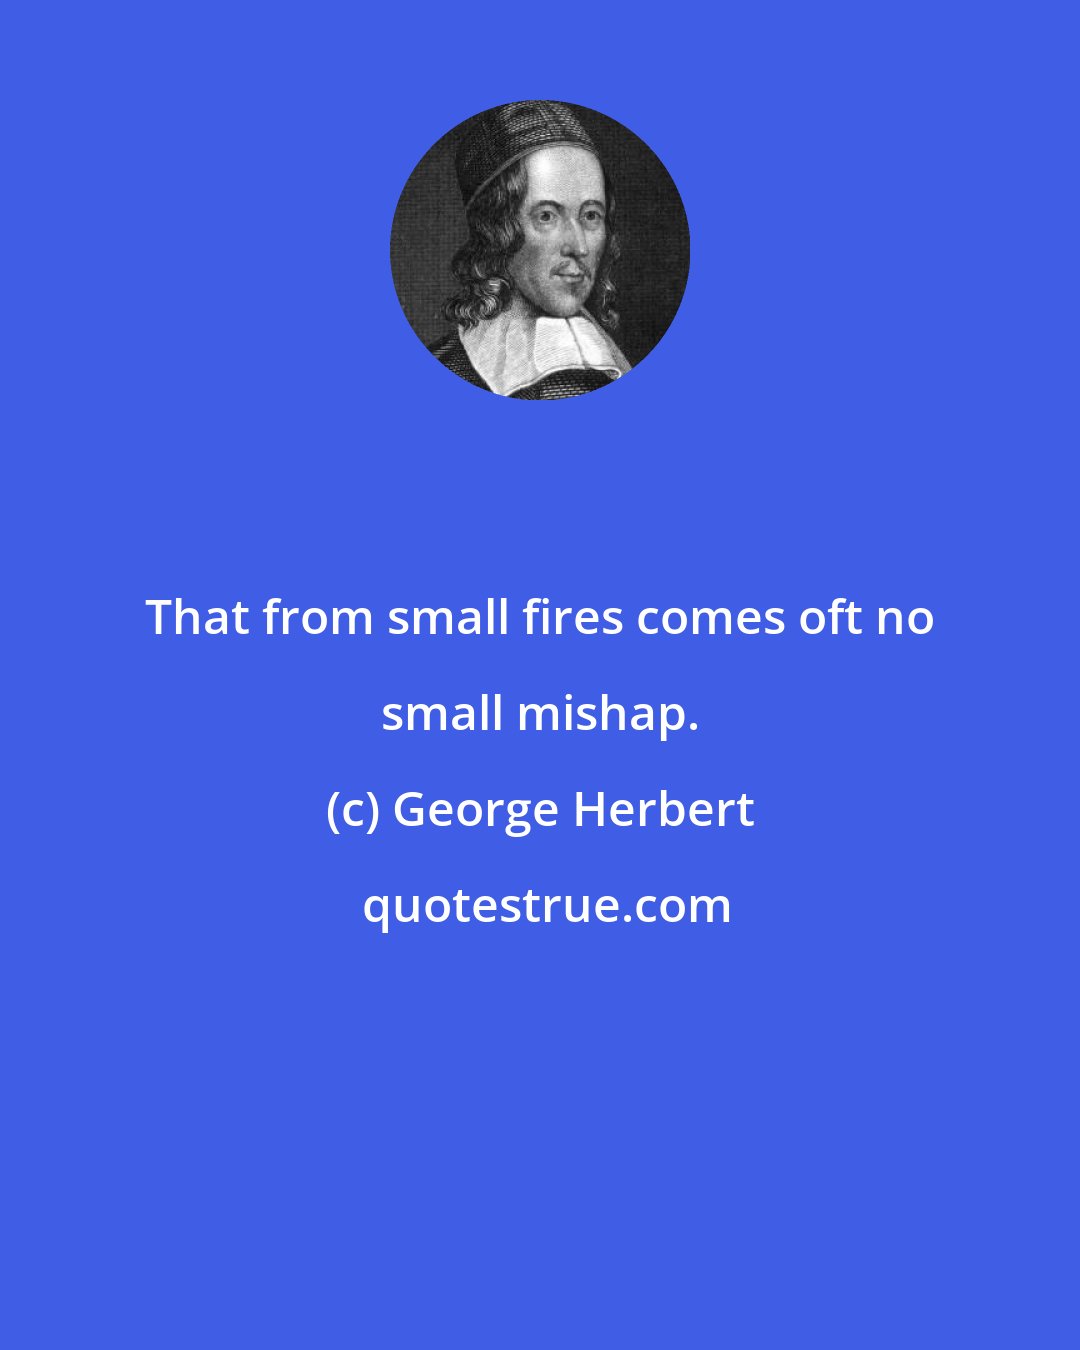 George Herbert: That from small fires comes oft no small mishap.